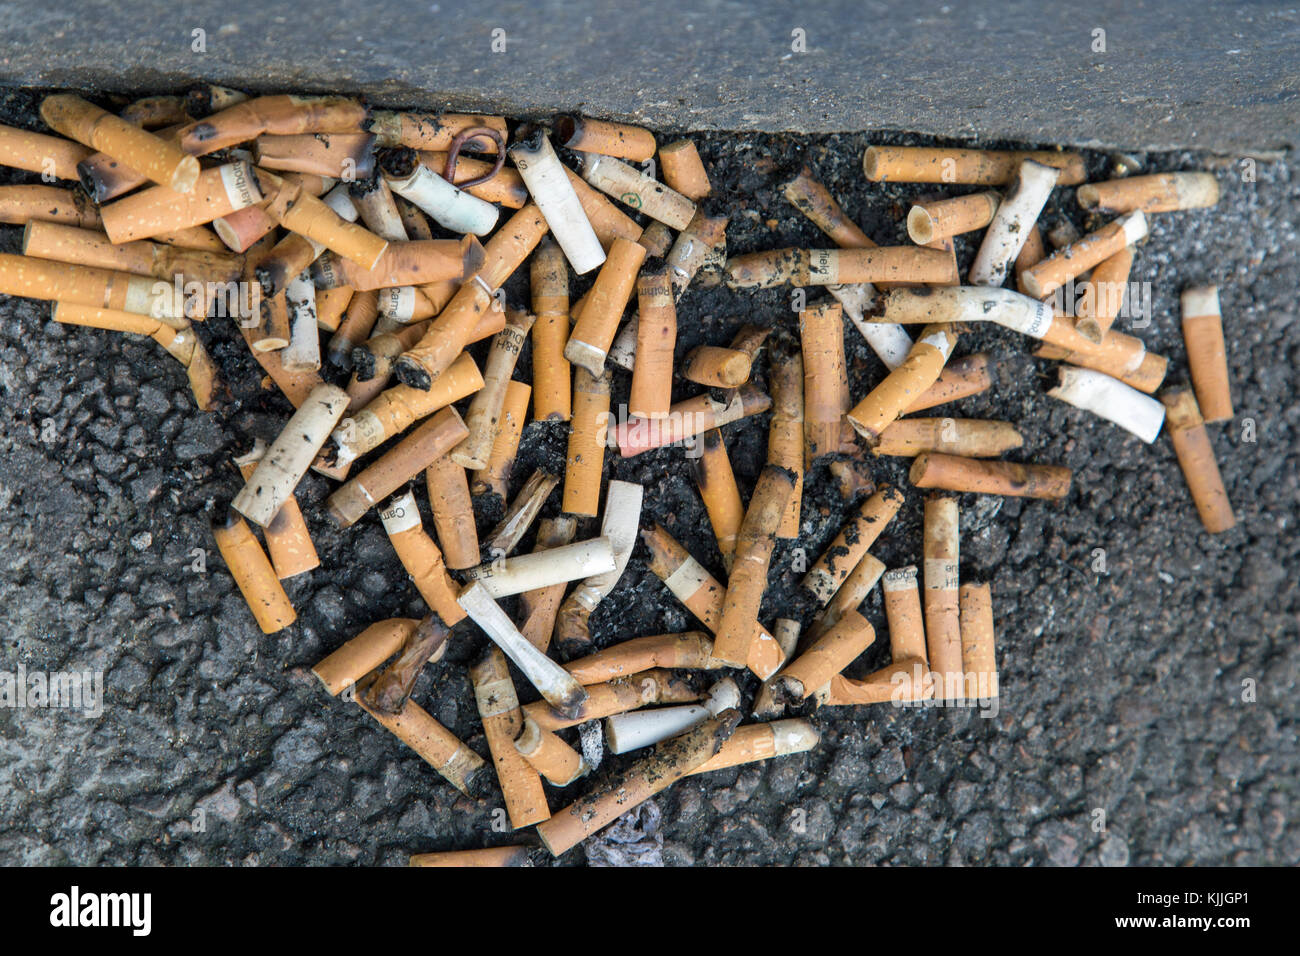 London, England, November 2017, a pile of cigarette ends on the floor Stock Photo